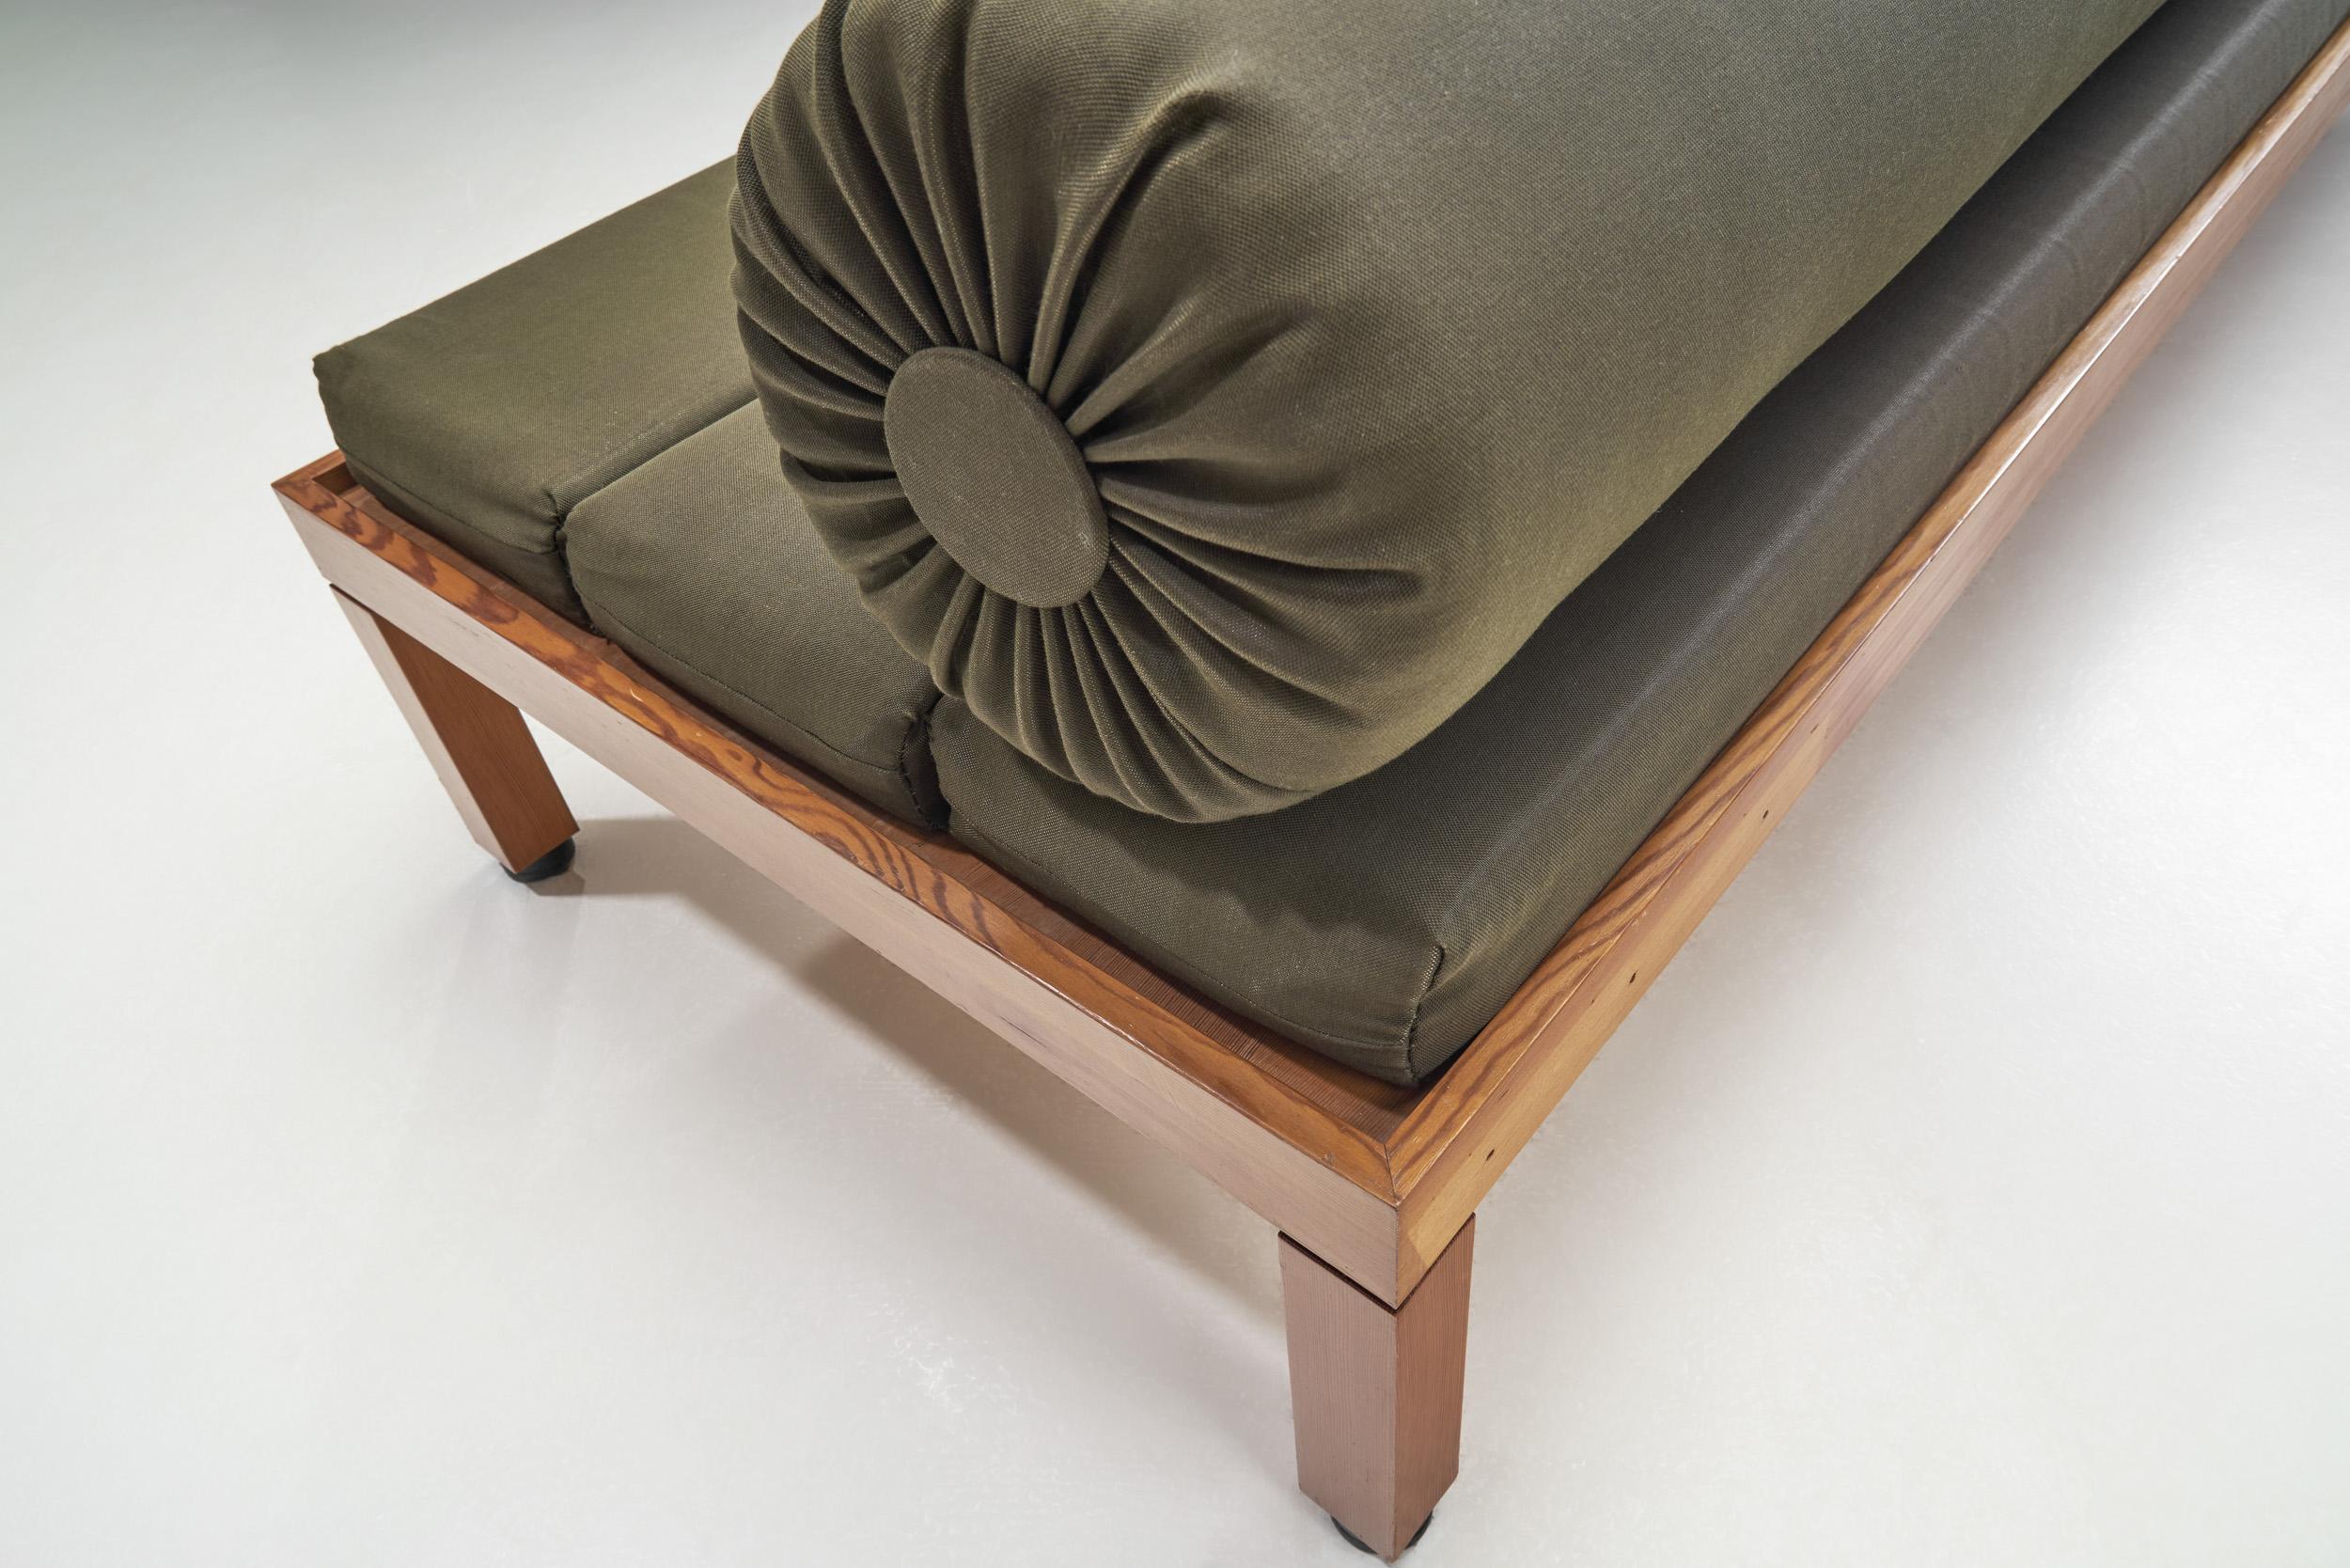 A Haroma, Saarinen, and Salo Design Collaboration Daybed, Finland 1960 For Sale 7